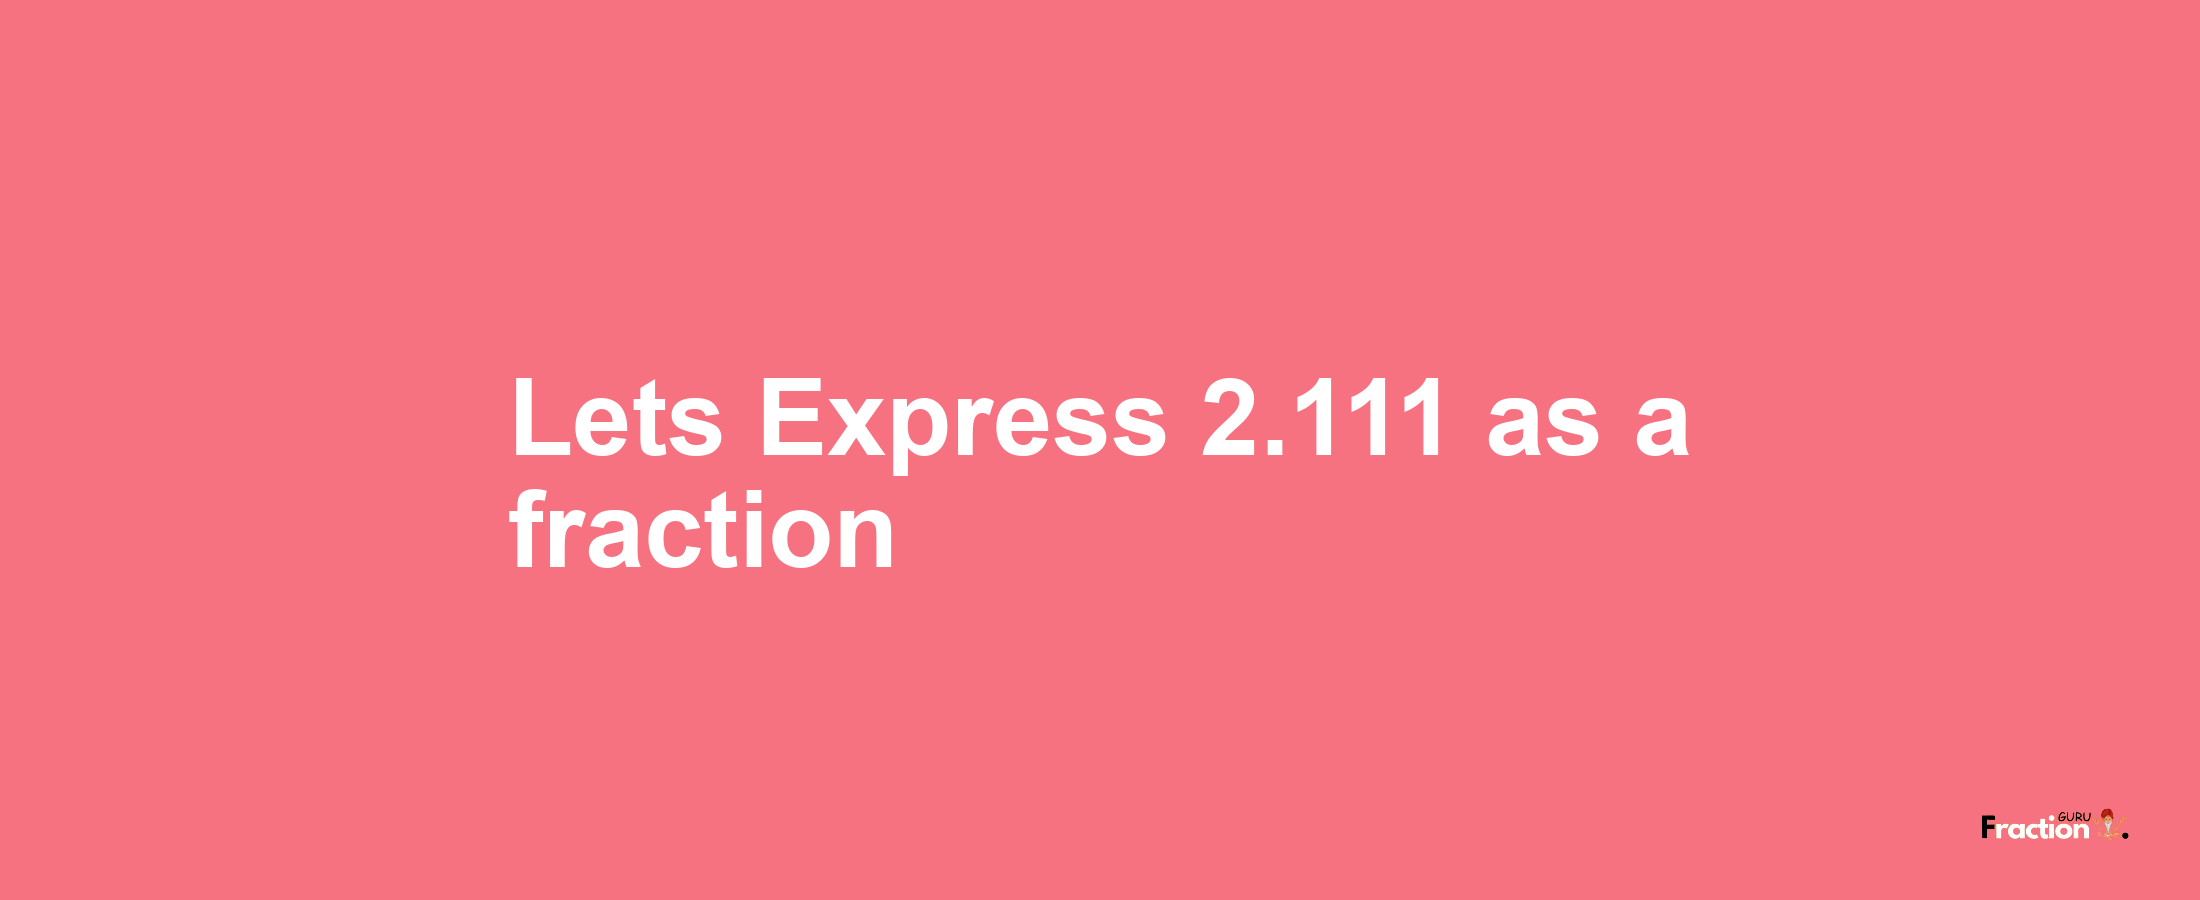 Lets Express 2.111 as afraction